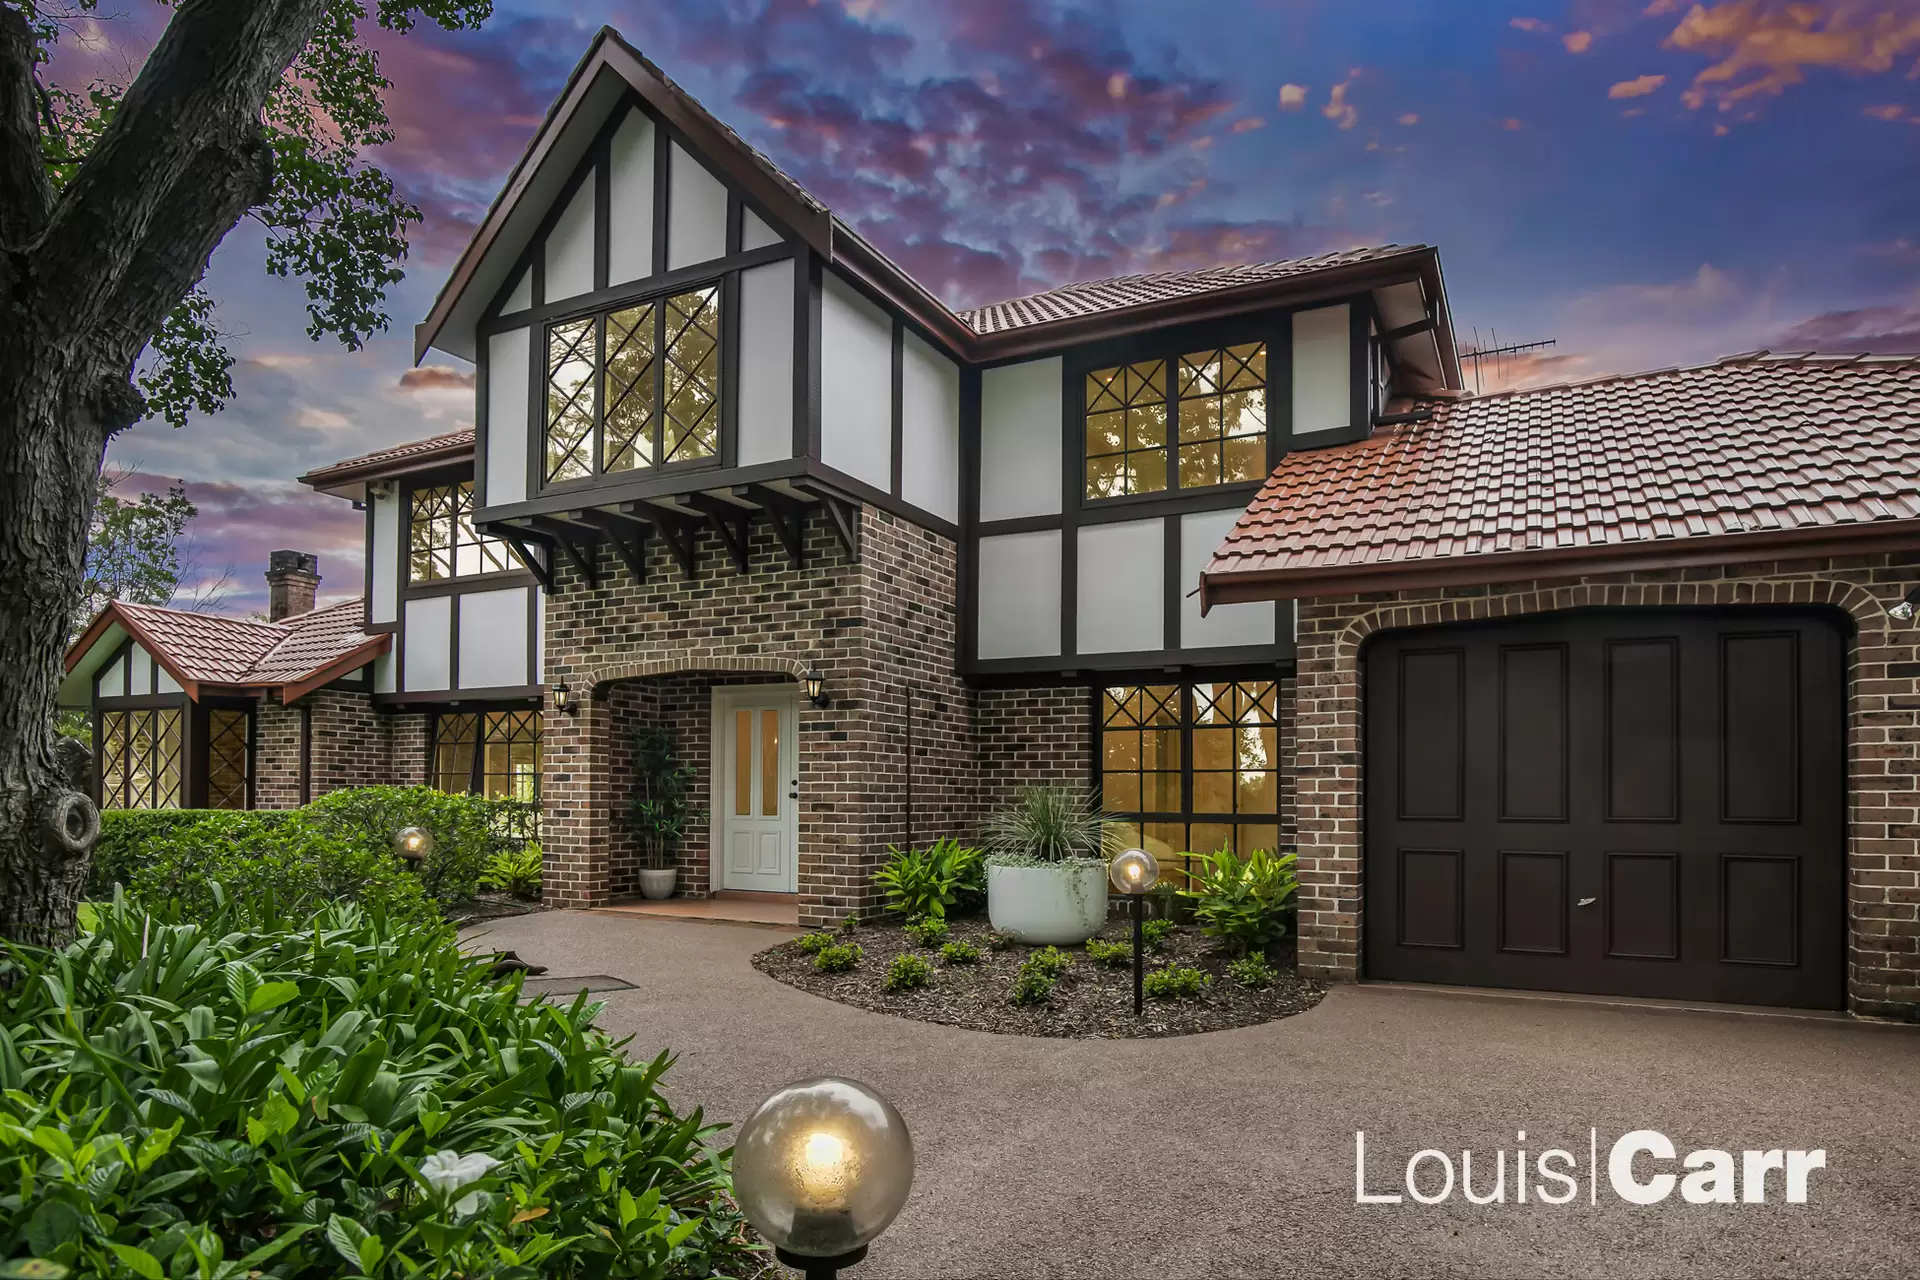 Photo #2: 18 Josephine Crescent, Cherrybrook - Auction by Louis Carr Real Estate